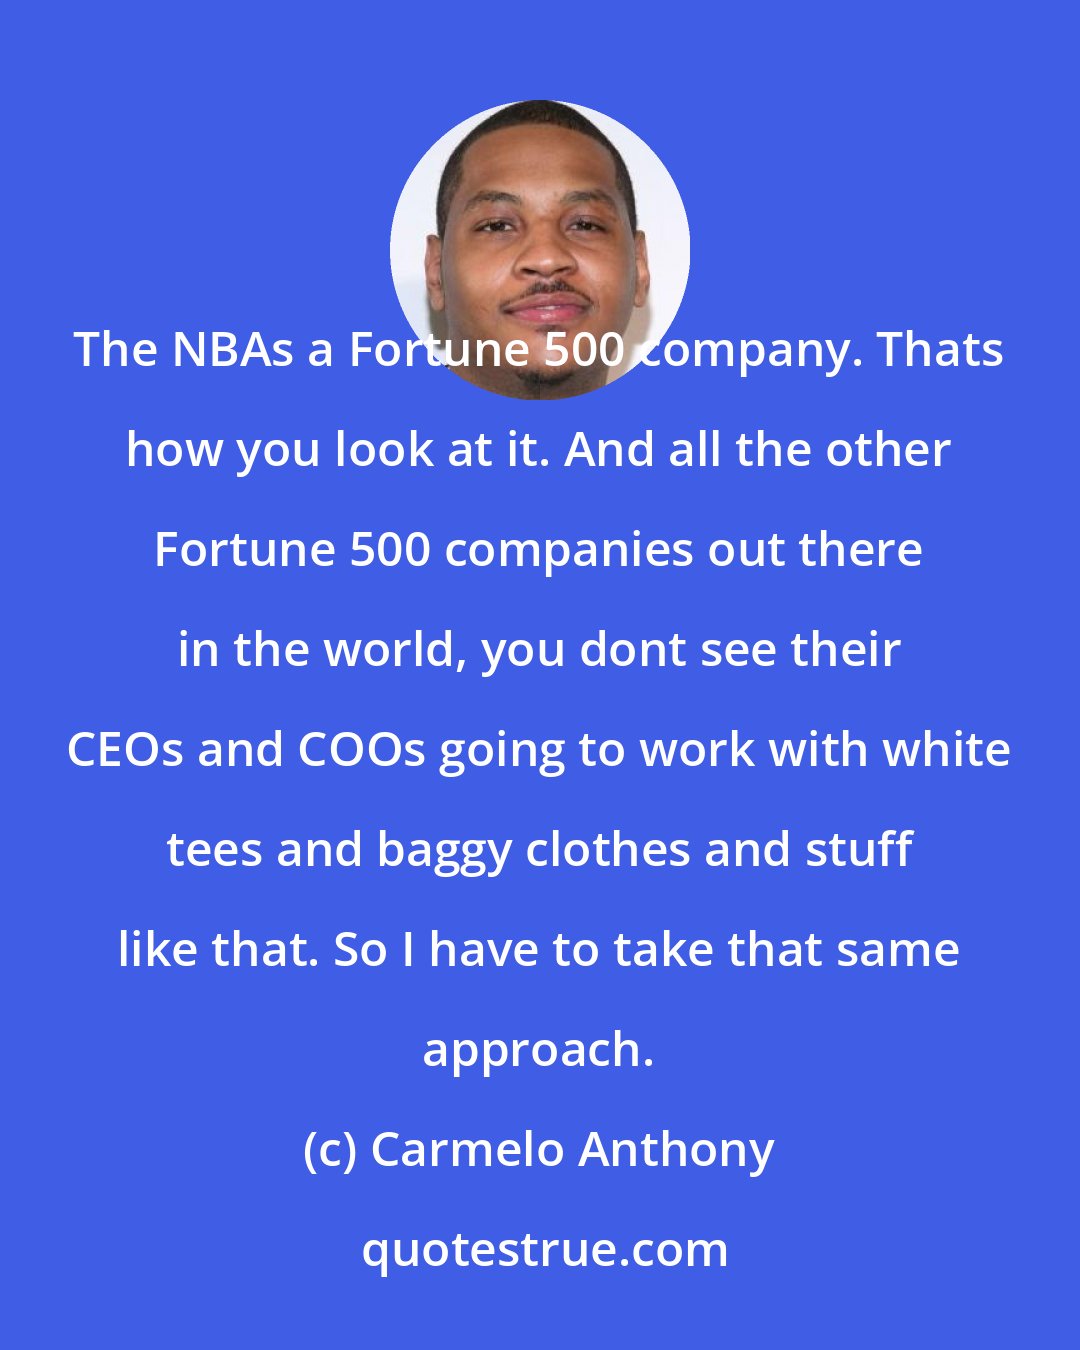 Carmelo Anthony: The NBAs a Fortune 500 company. Thats how you look at it. And all the other Fortune 500 companies out there in the world, you dont see their CEOs and COOs going to work with white tees and baggy clothes and stuff like that. So I have to take that same approach.